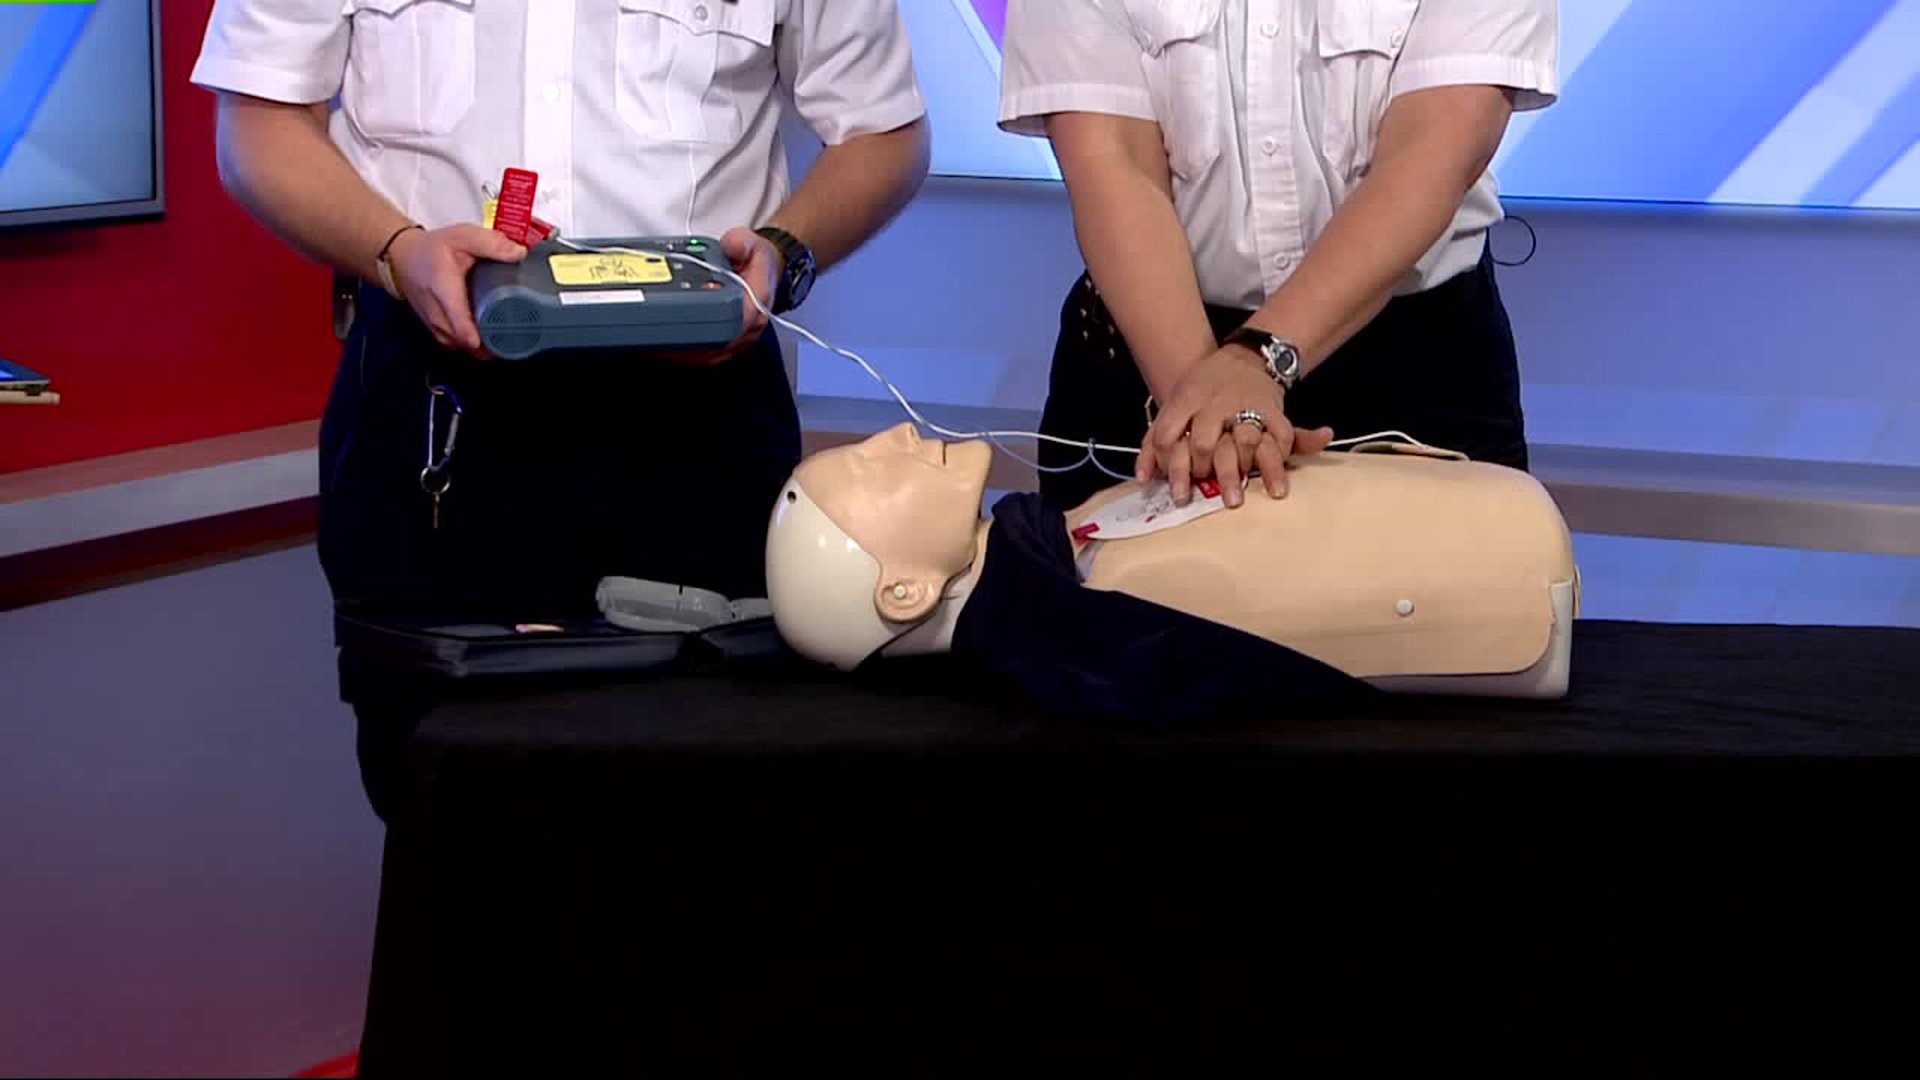 Susquehanna Valley EMS shows how using an AED can save a life